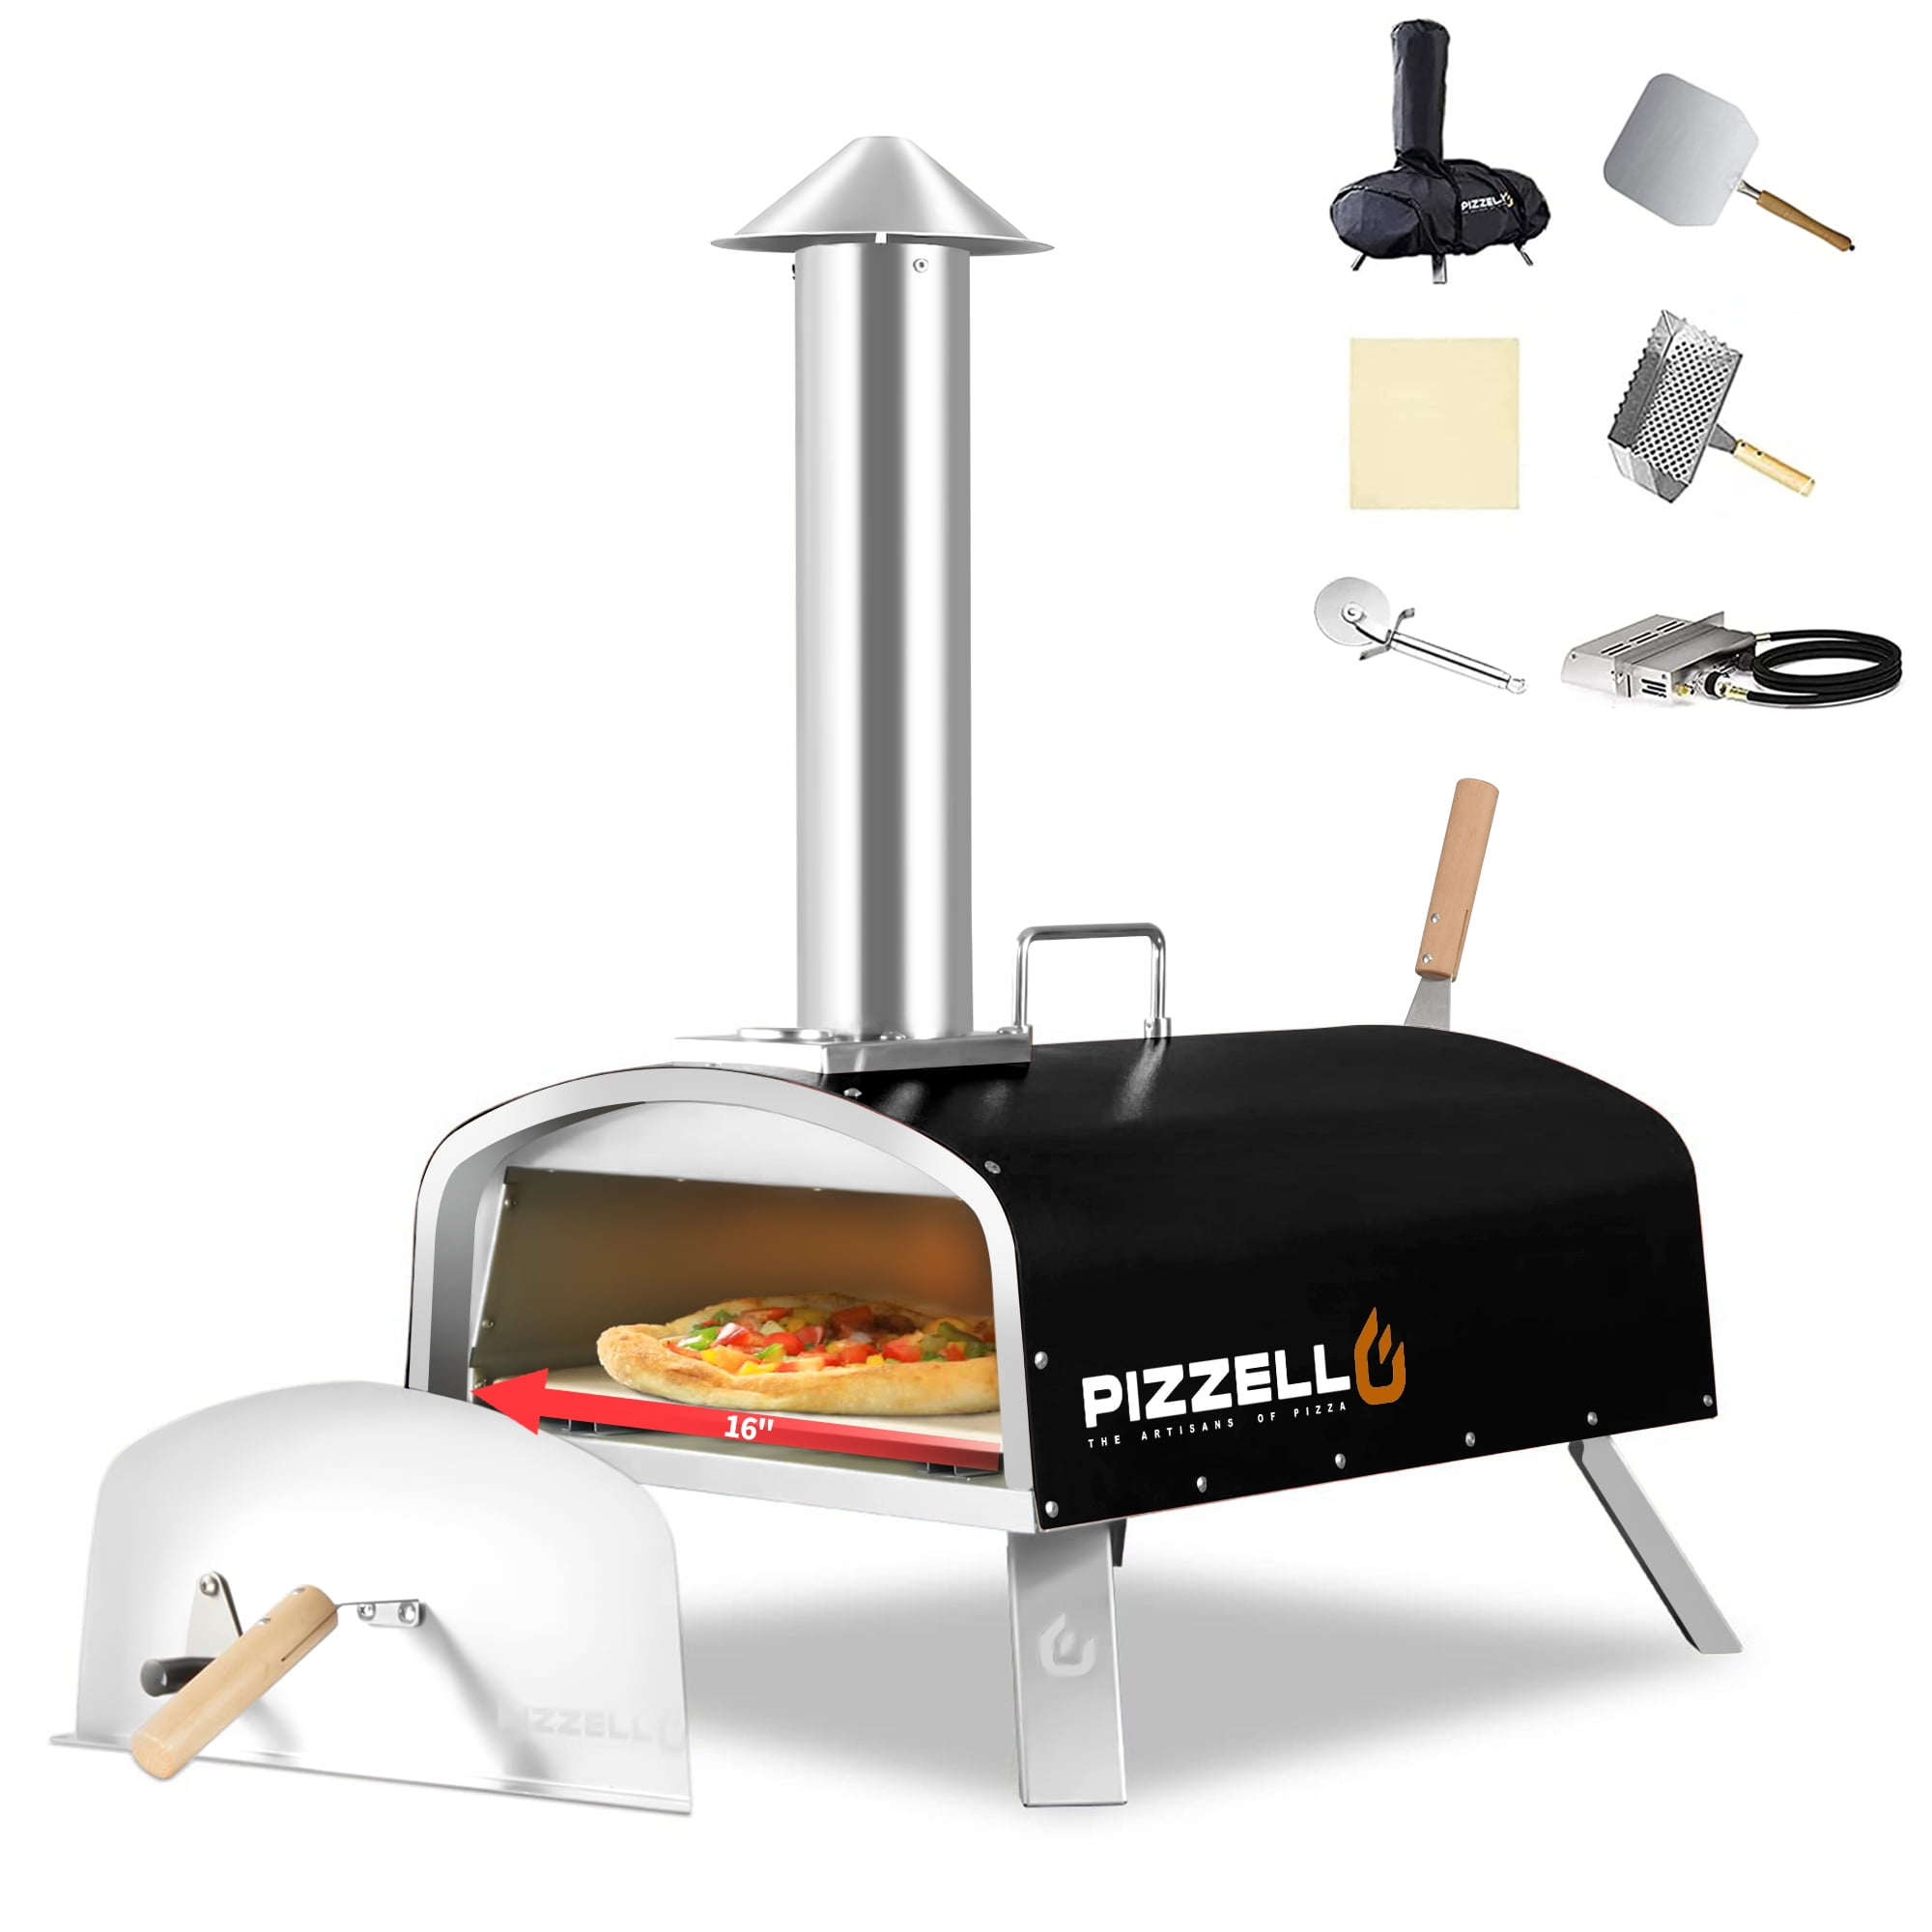 The Cuisinart Portable Outdoor Pizza Oven Is 26% Off at